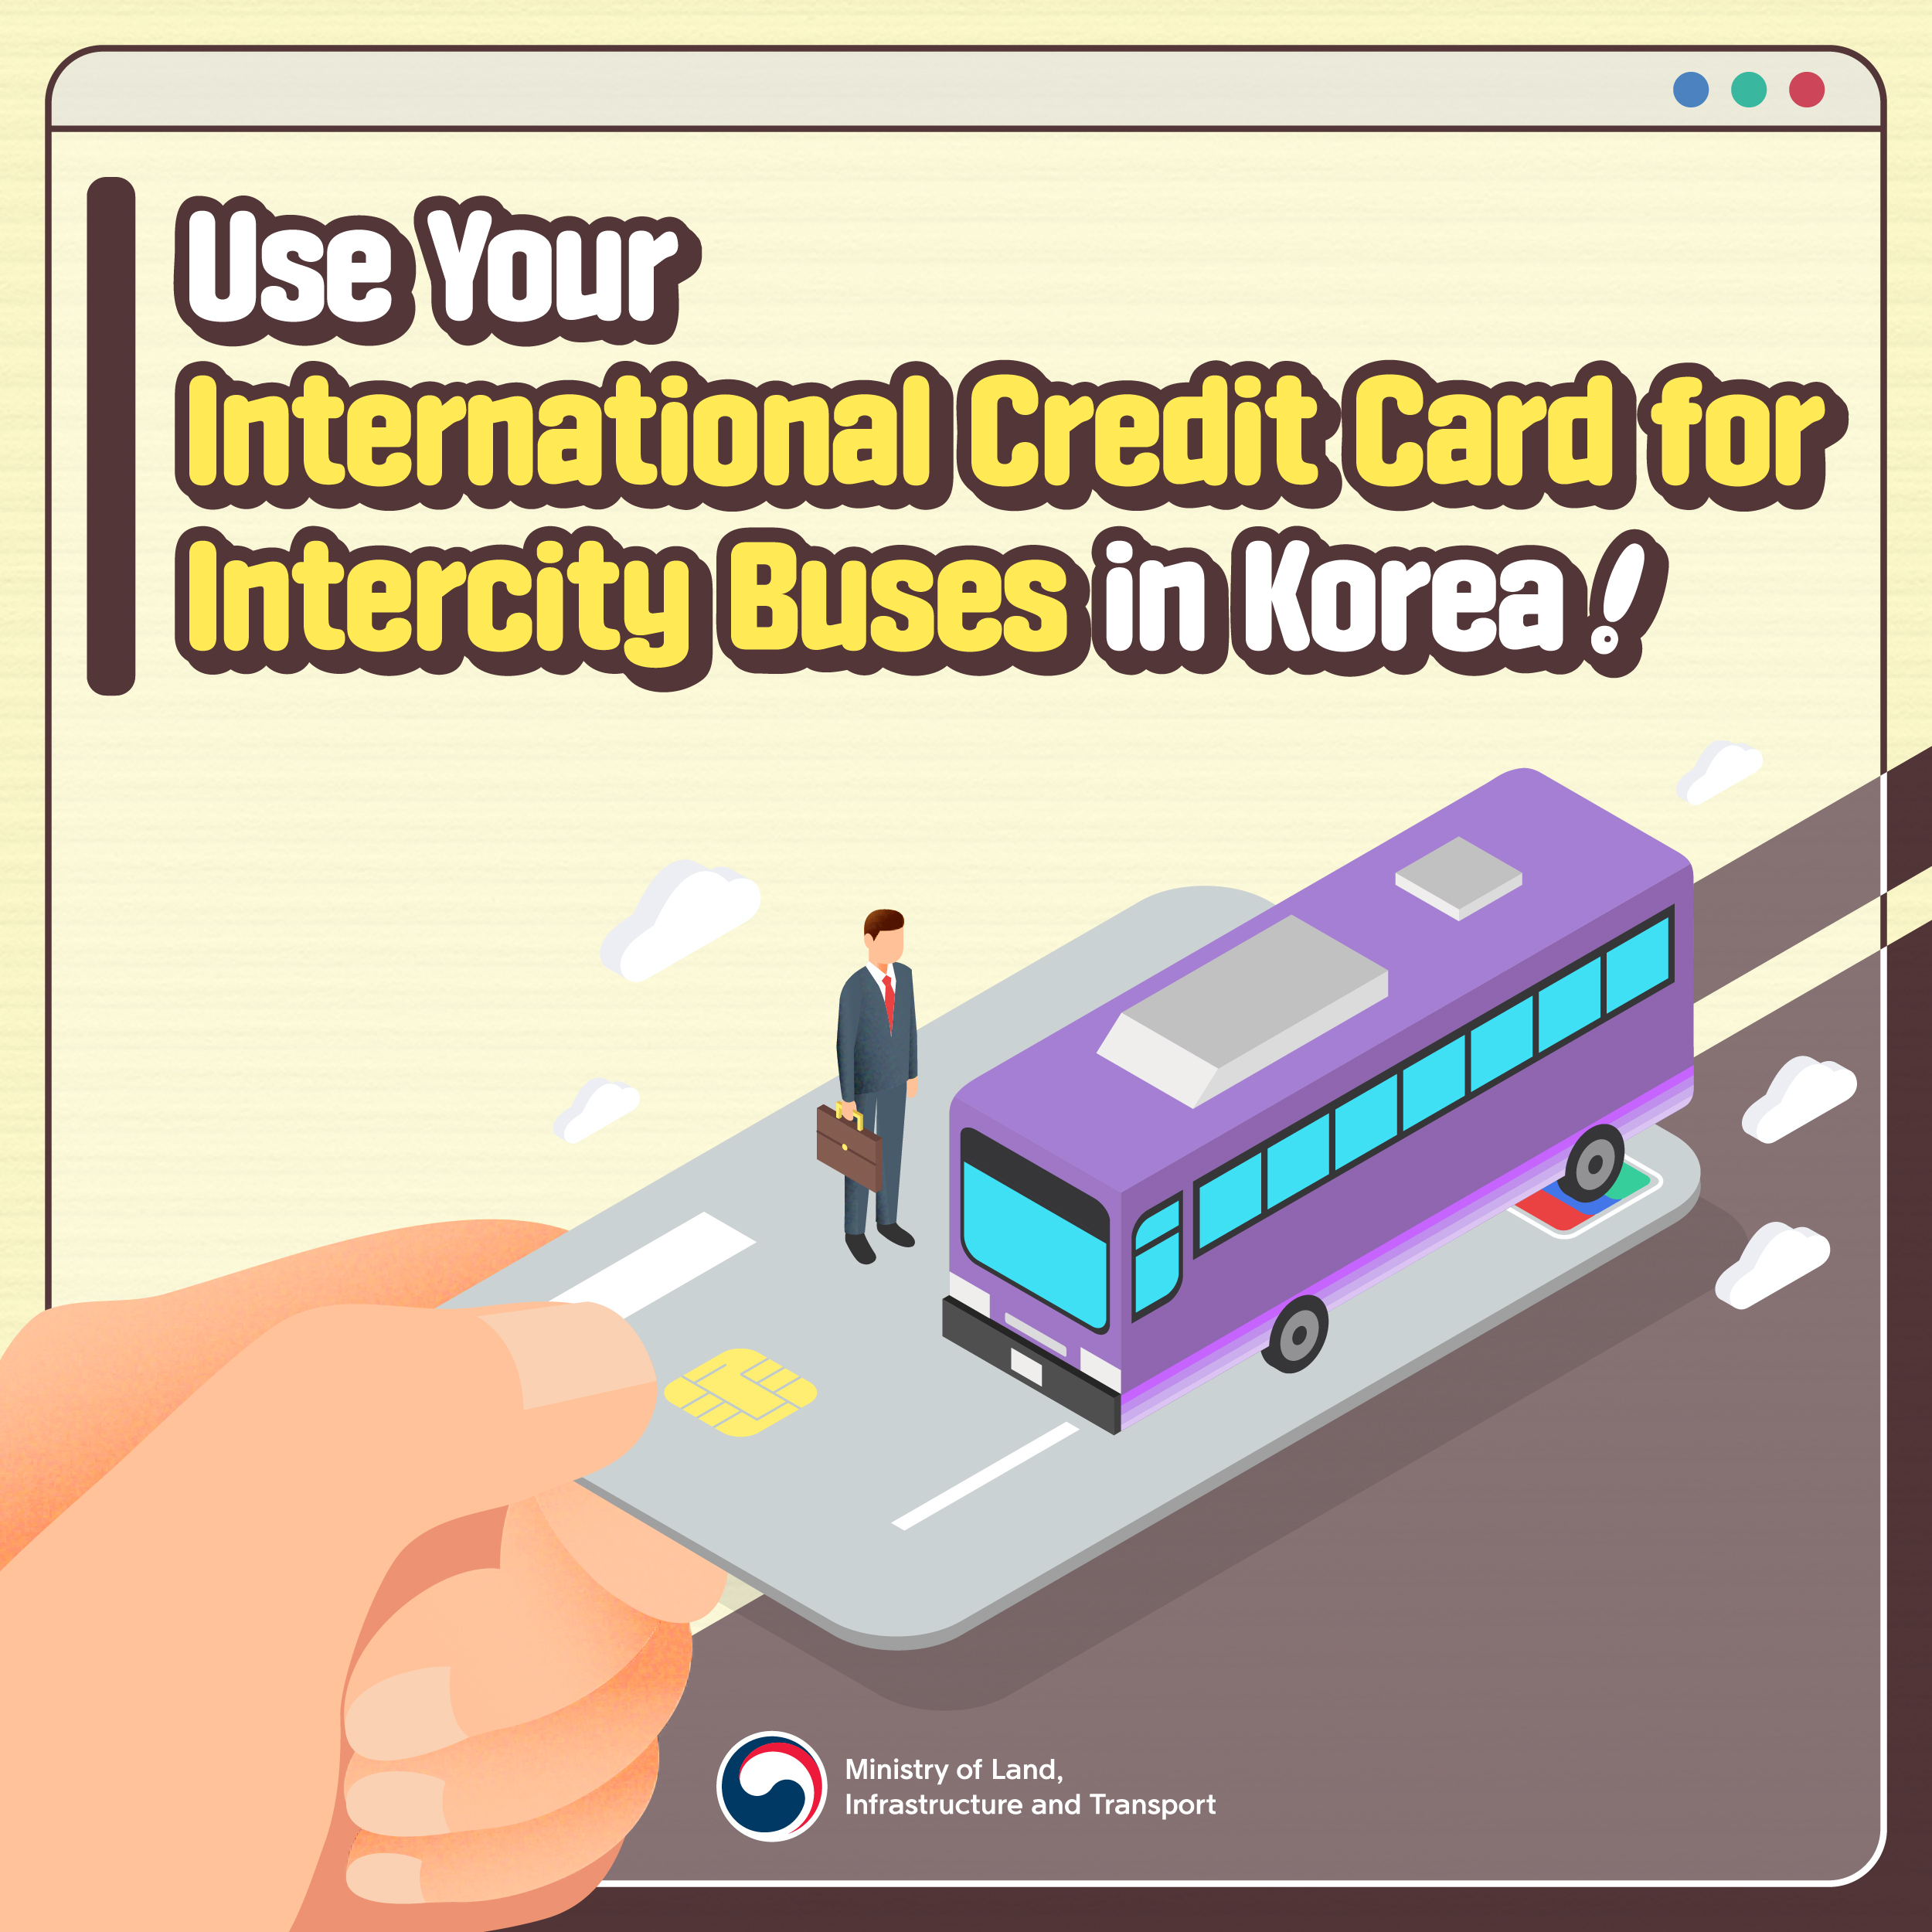 pic 1. Use Your International Credit Card for InterCity Buses in Korea!